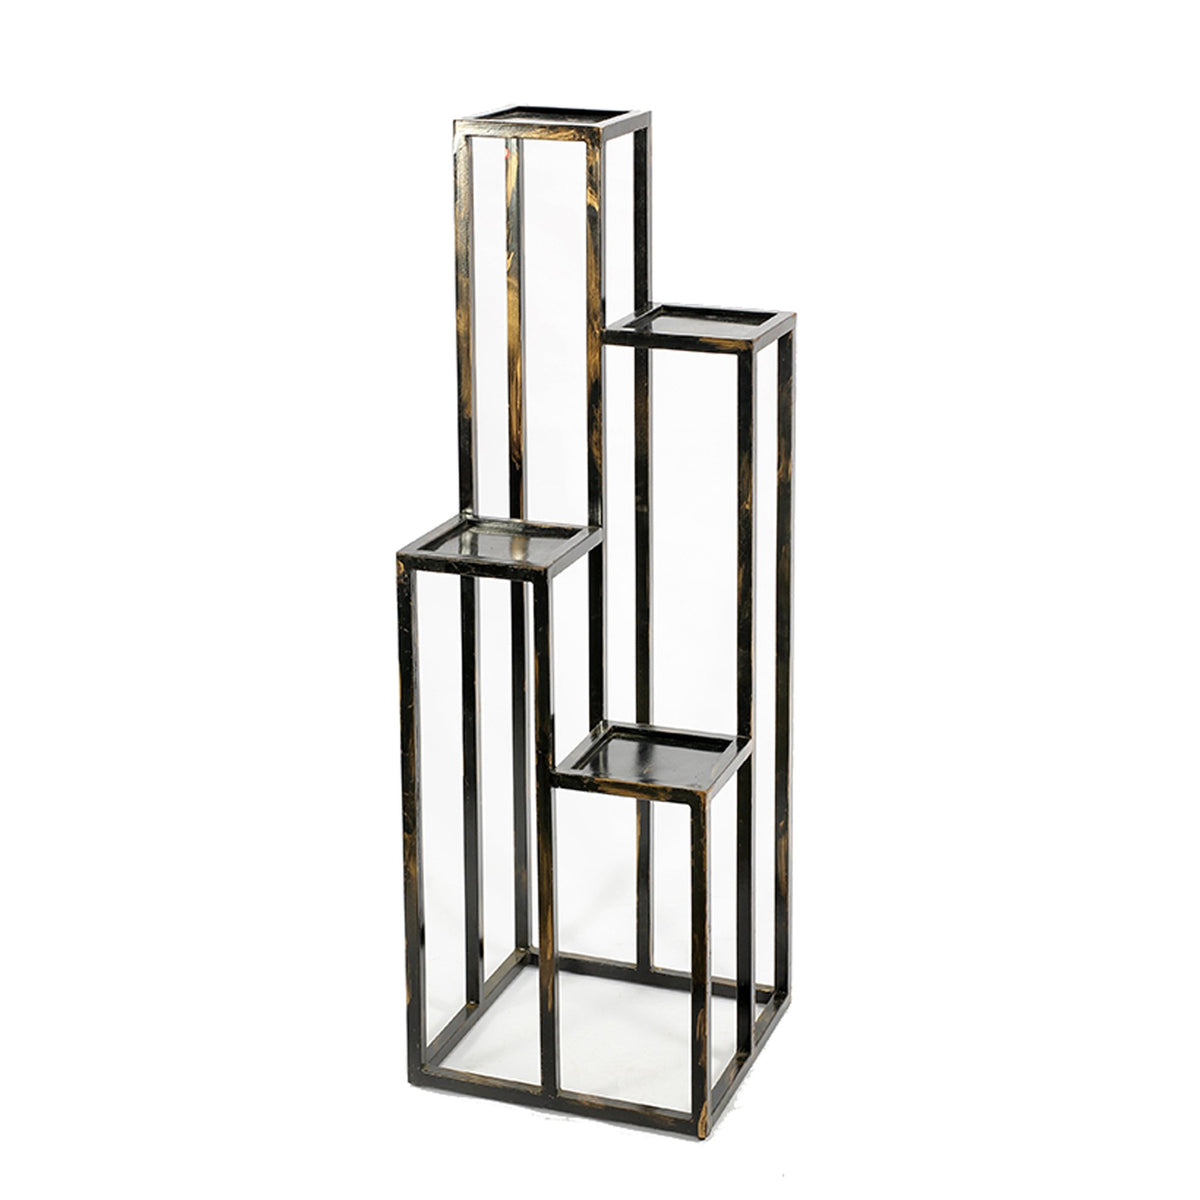 4 Tier Cast Iron Frame Plant Stand with Tubular Legs, Black and Gold - BM216736